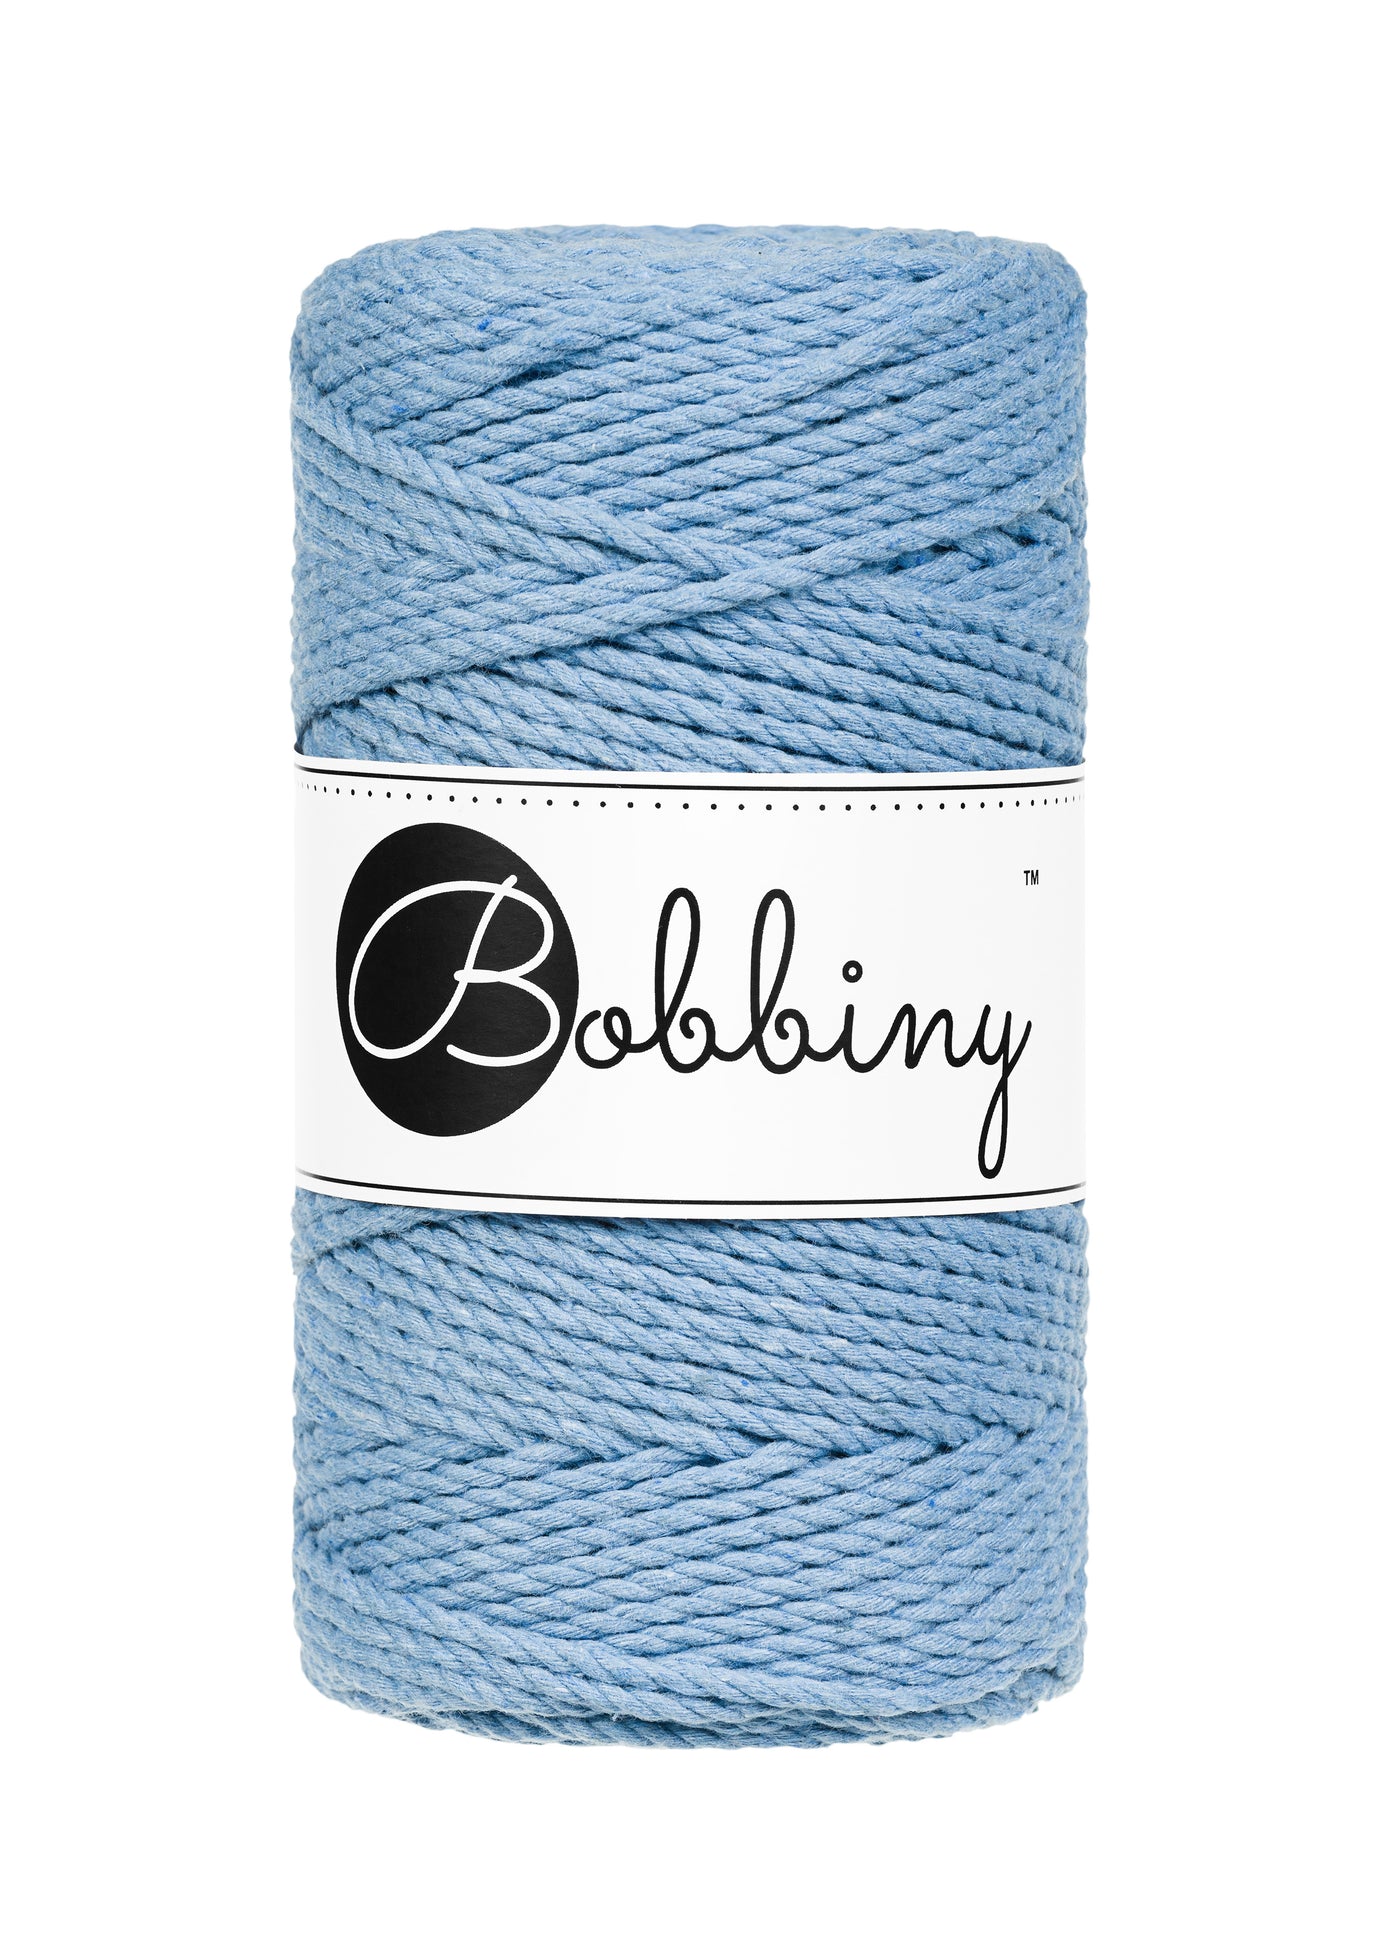 Bobbiny 3ply 3mm macrame rope in perfect blue shade